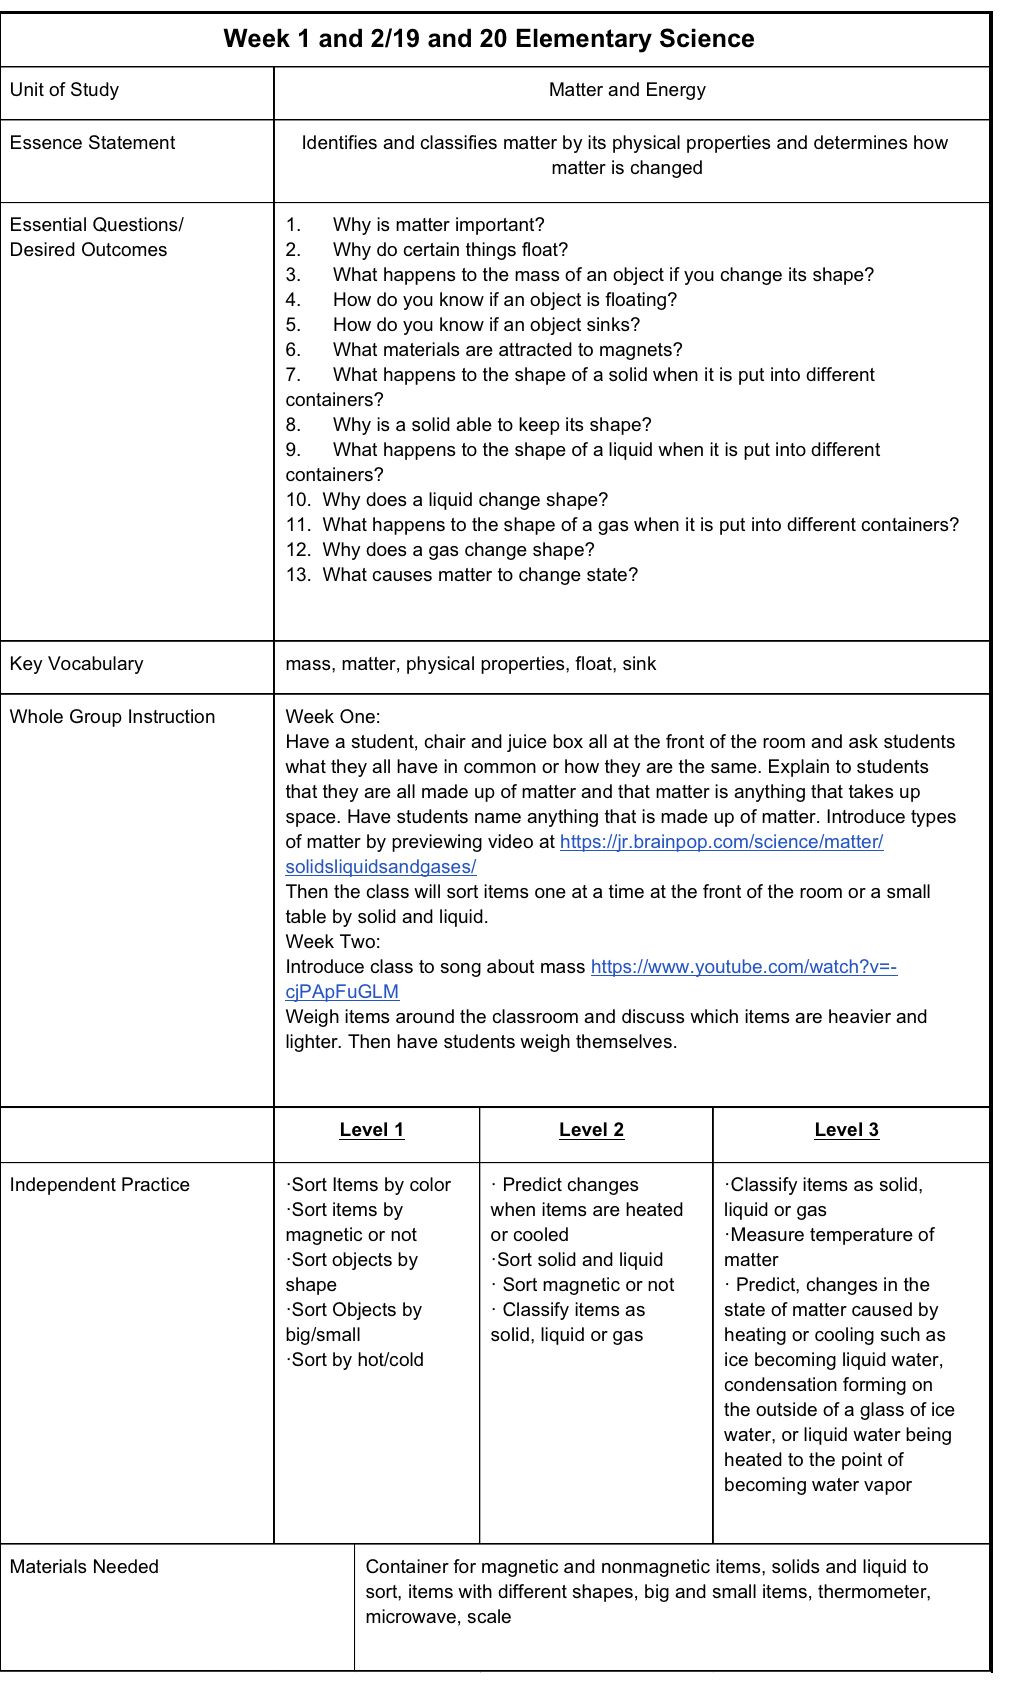 Elementary Science Lesson Plans Elementary Science Lesson Plans for Special Education